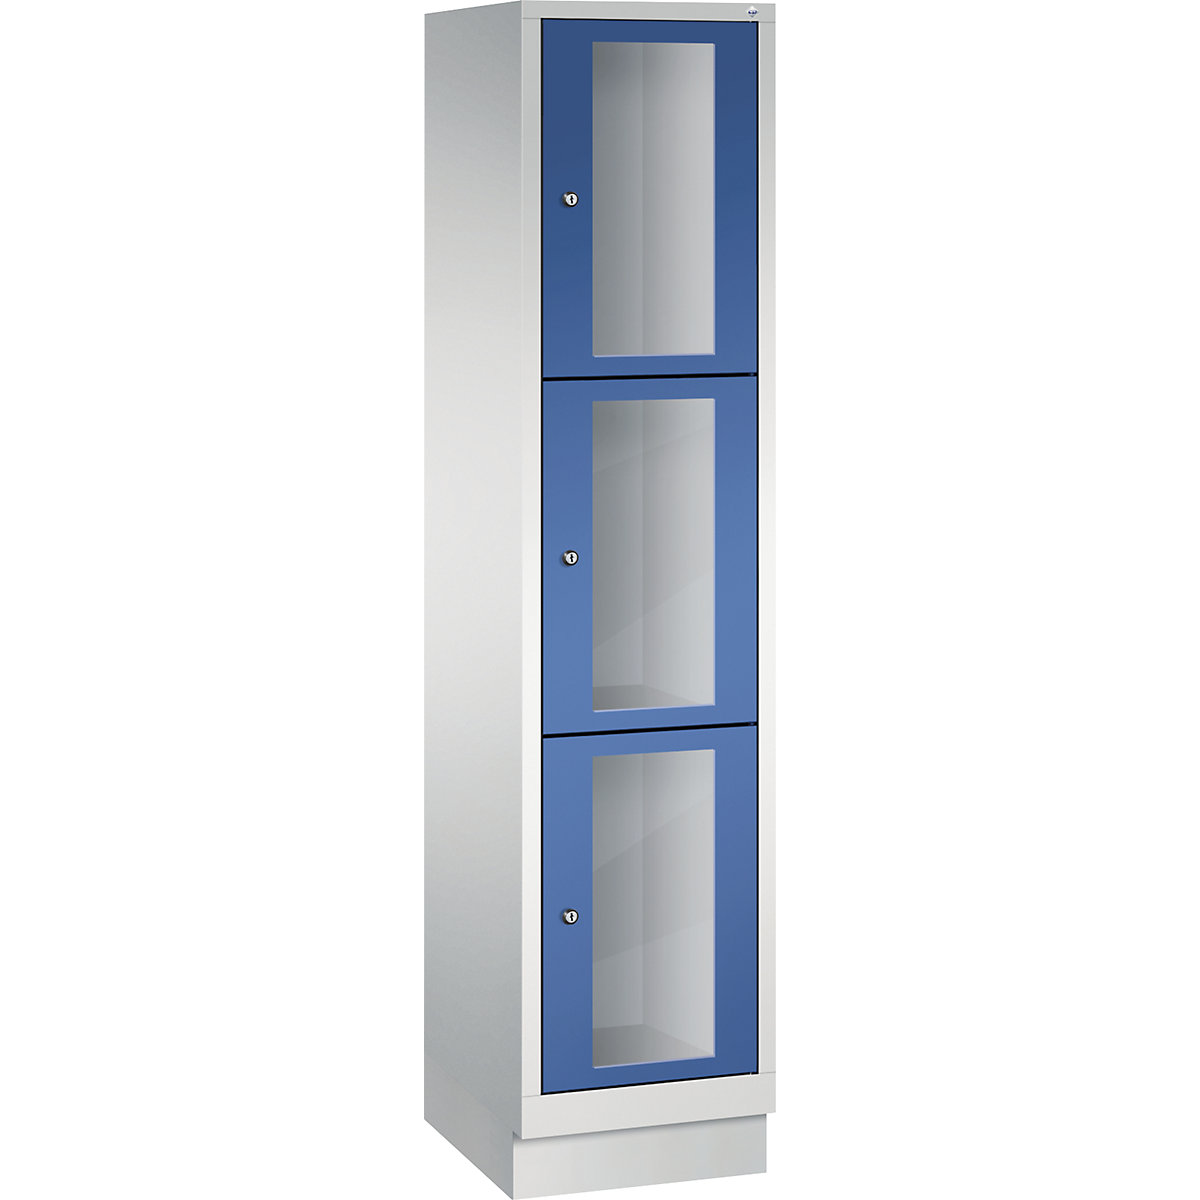 C+P – CLASSIC locker unit, compartment height 510 mm, with plinth, 3 compartments, width 420 mm, gentian blue door